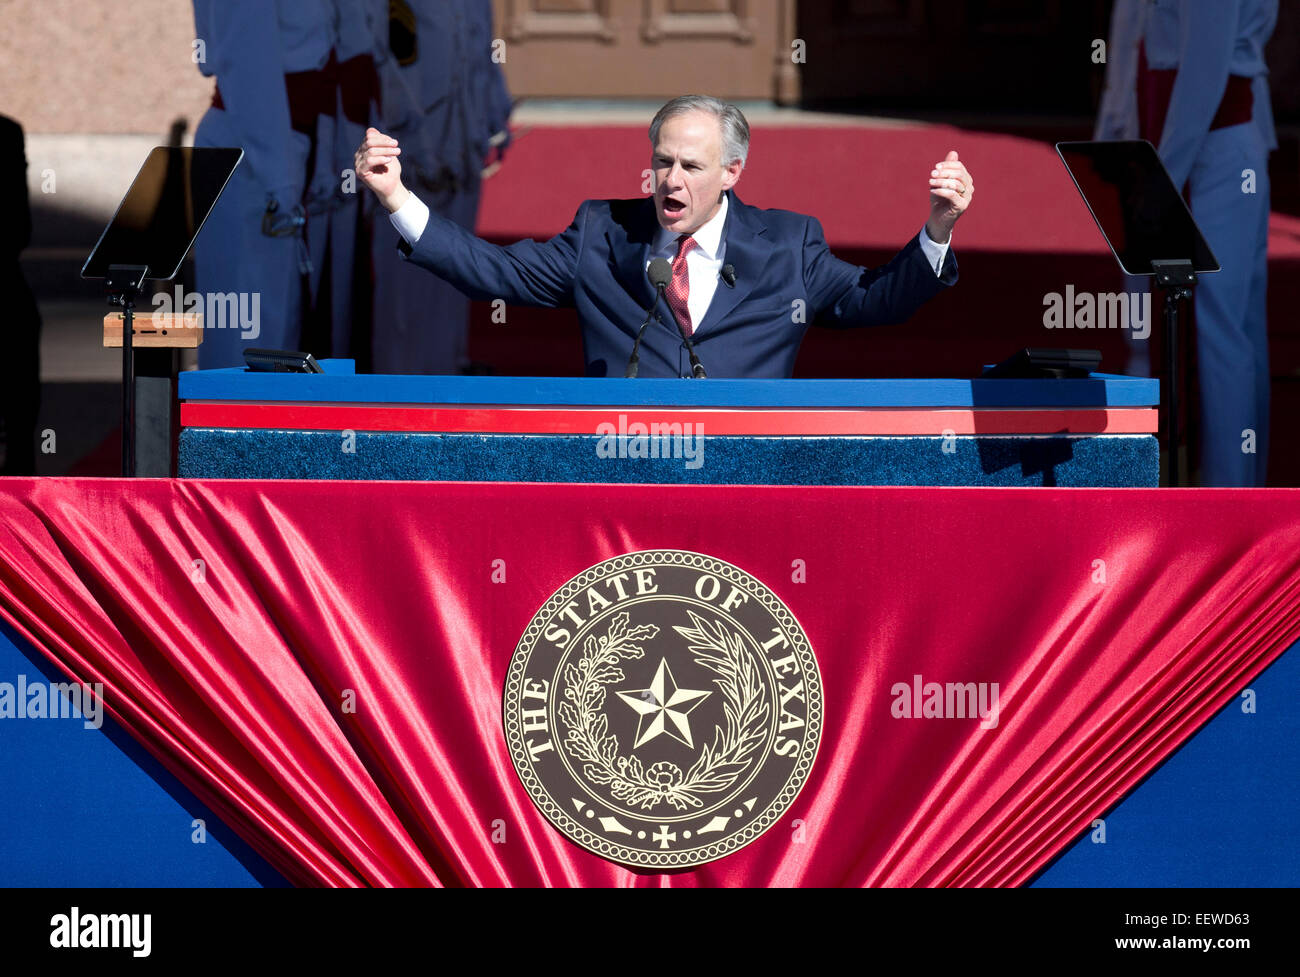 ANew Texas Governor Greg Abbott gestures during his inaugural speech at